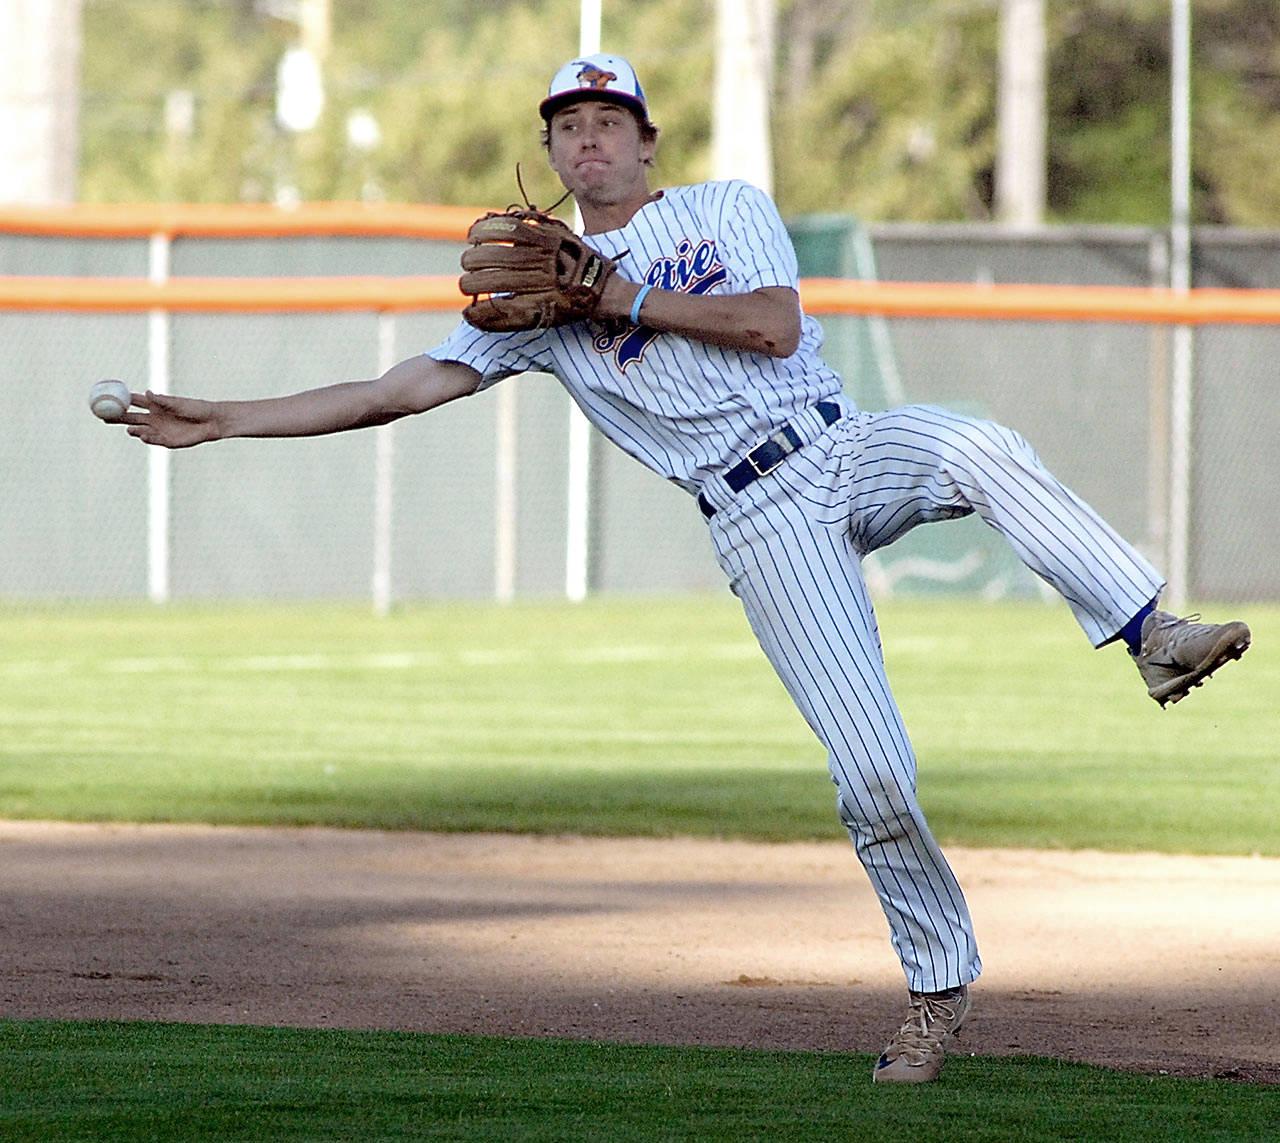 Keith Thorpe/Peninsula Daily News Lefties shortstop Trevor Rosenberg makes an off-balance throw to first on Friday evening at Port Angeles Civic Field.